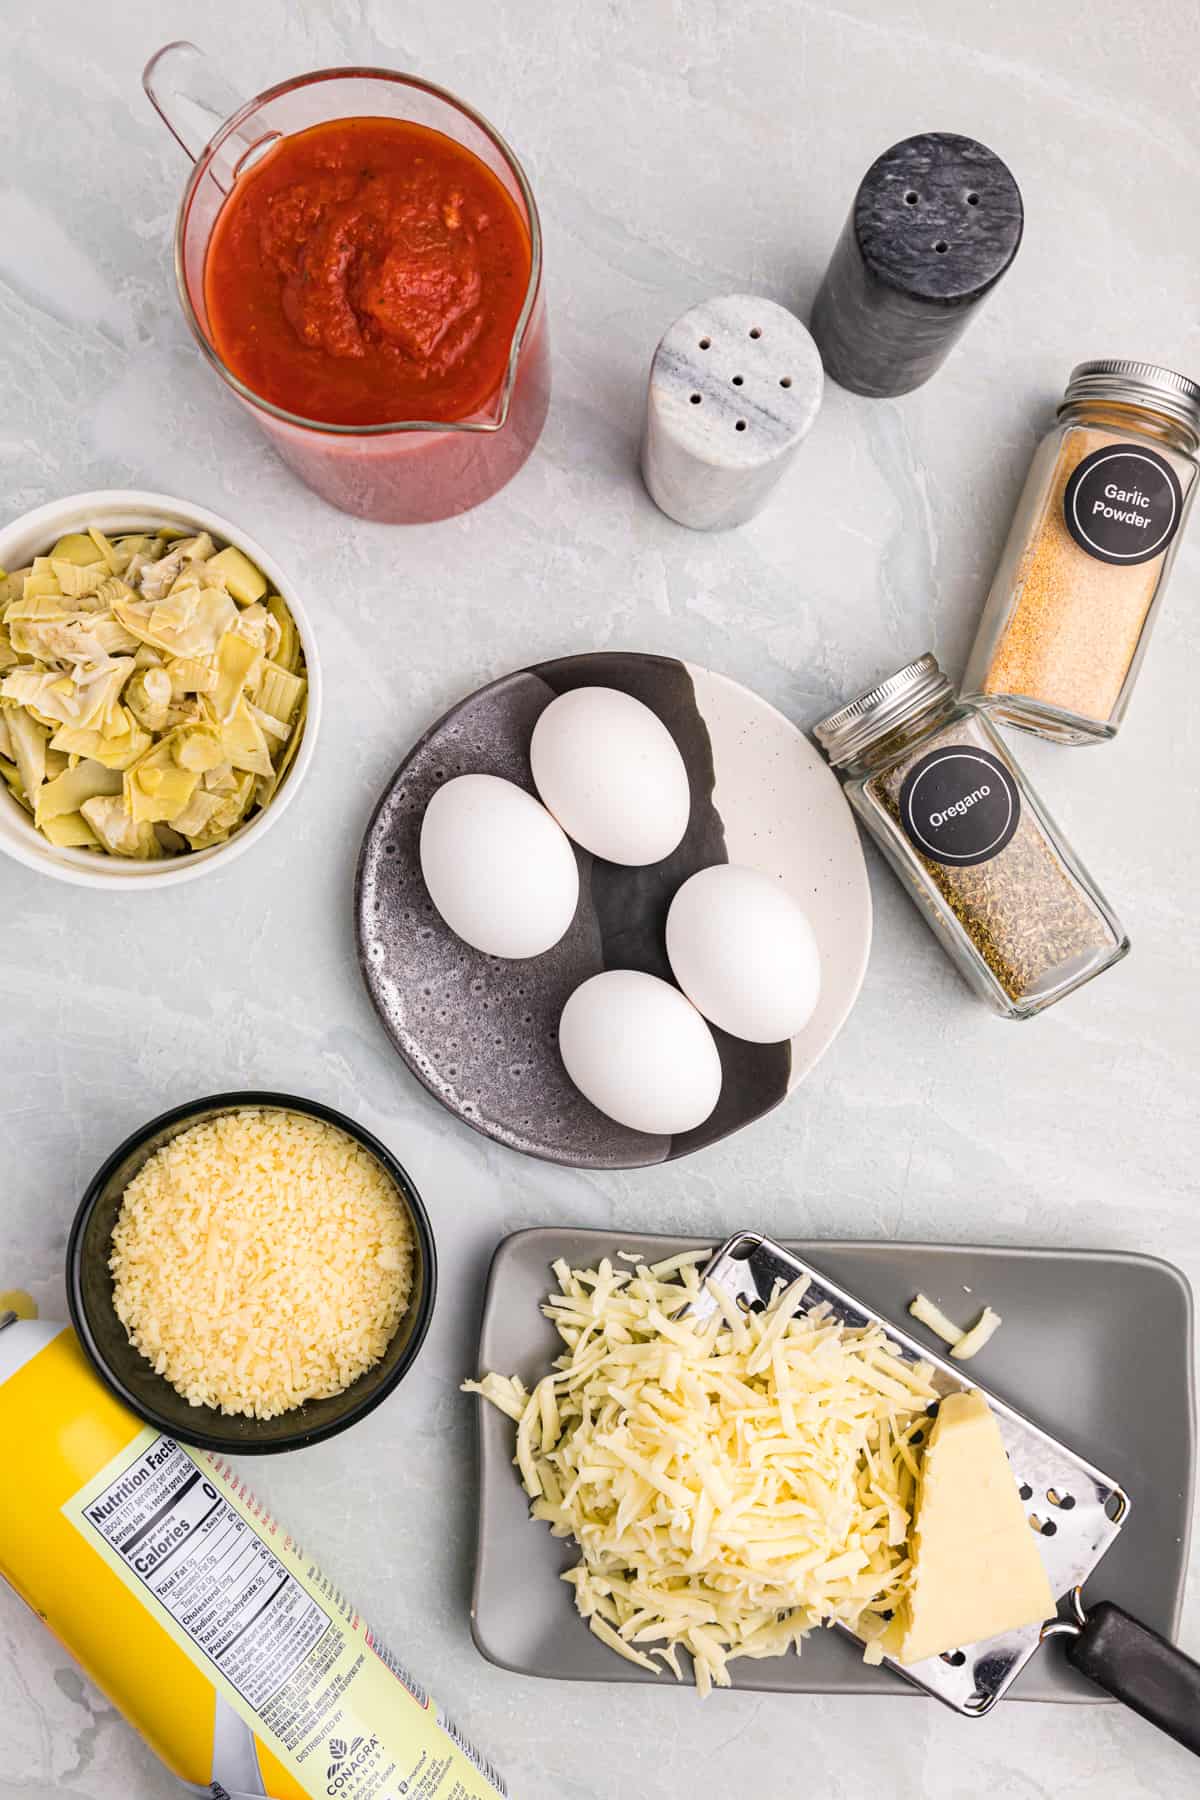 Ingredients for Italian Baked Eggs on a gray background.